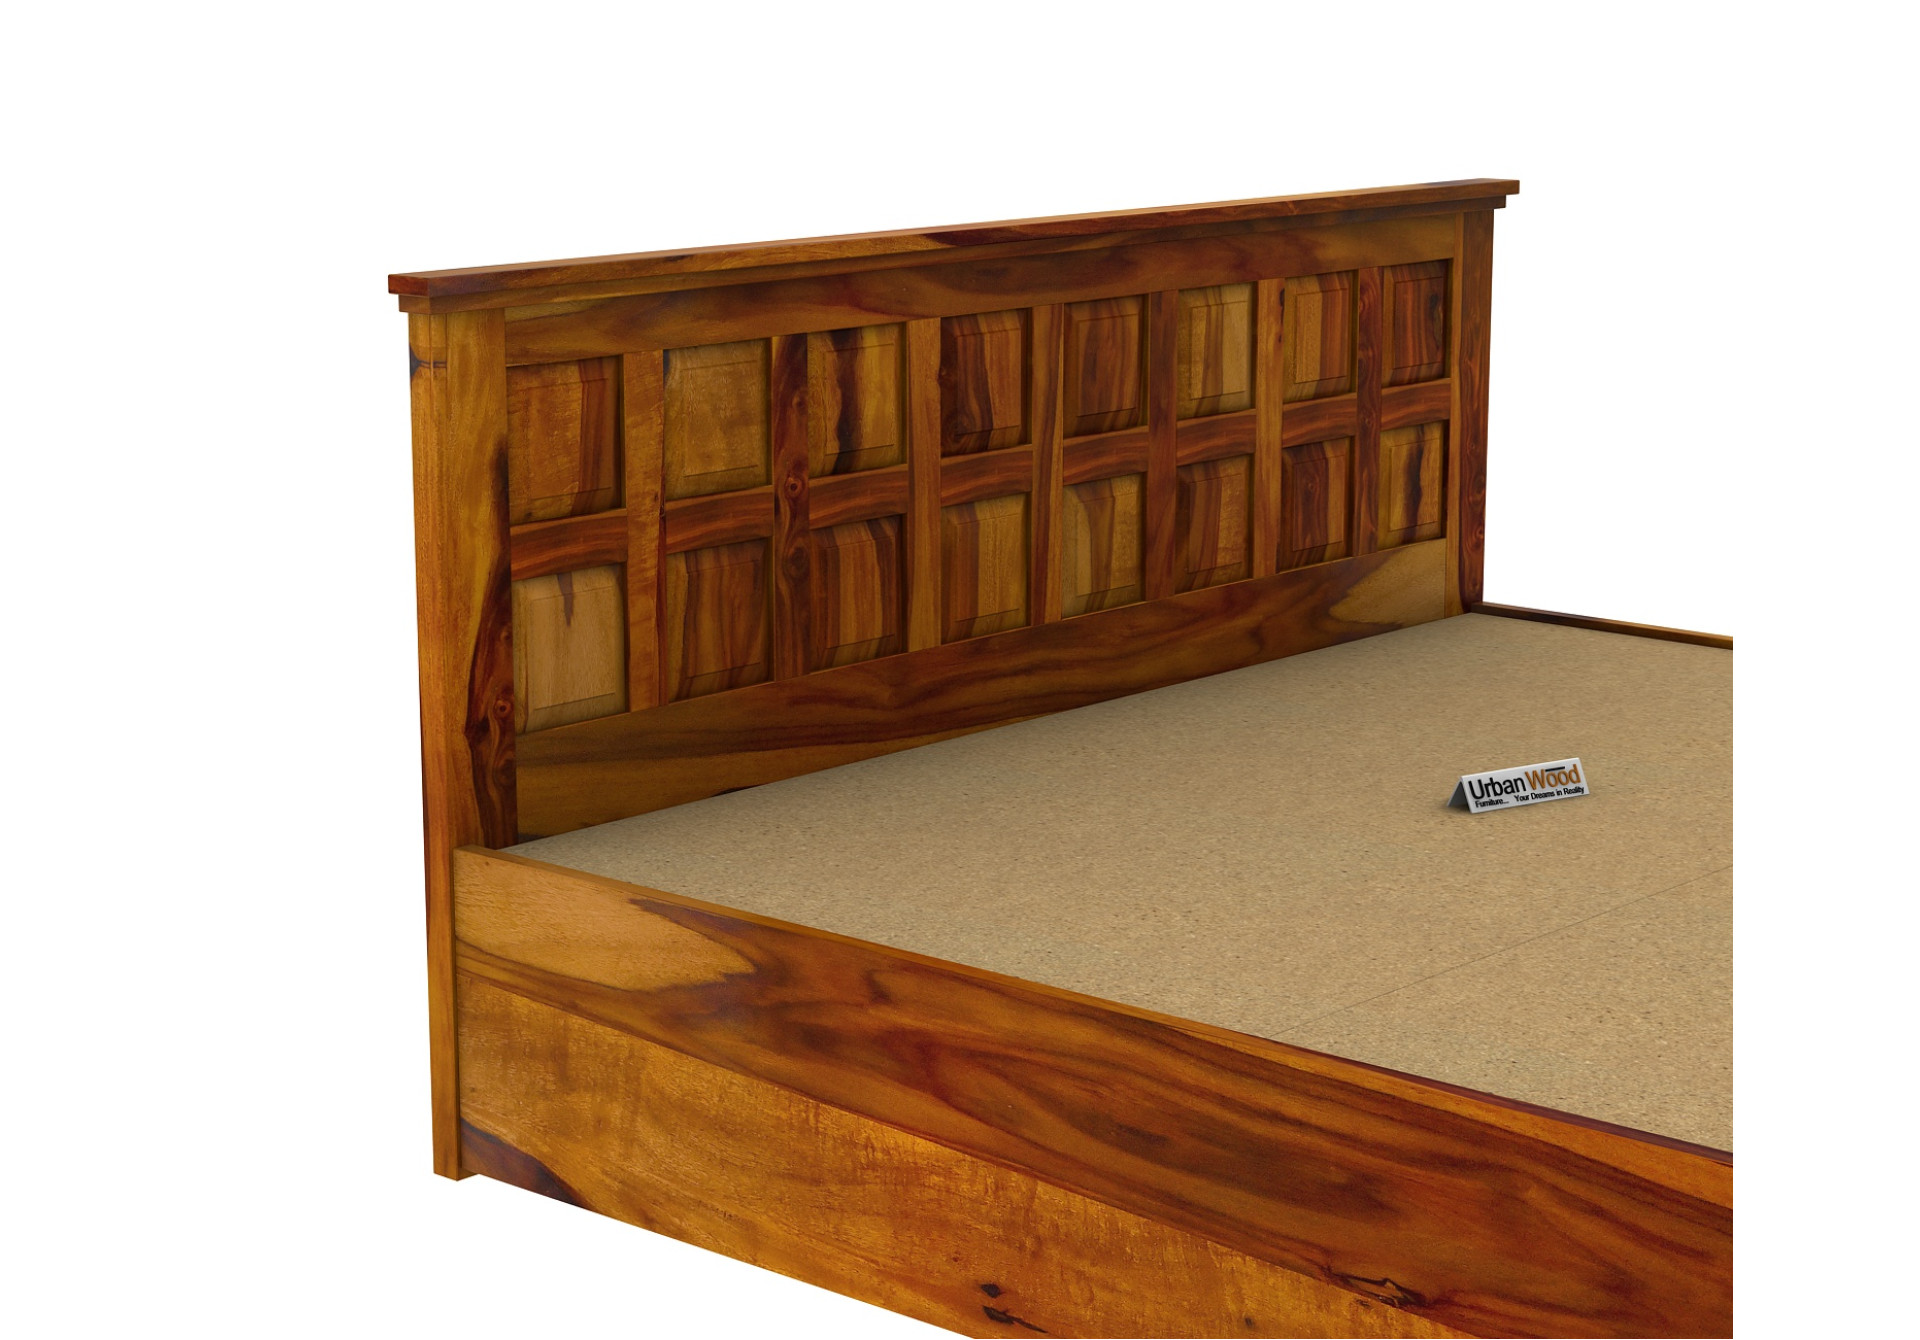 Thoms Hydraulic Storage Bed (Queen Size, Honey Finish)